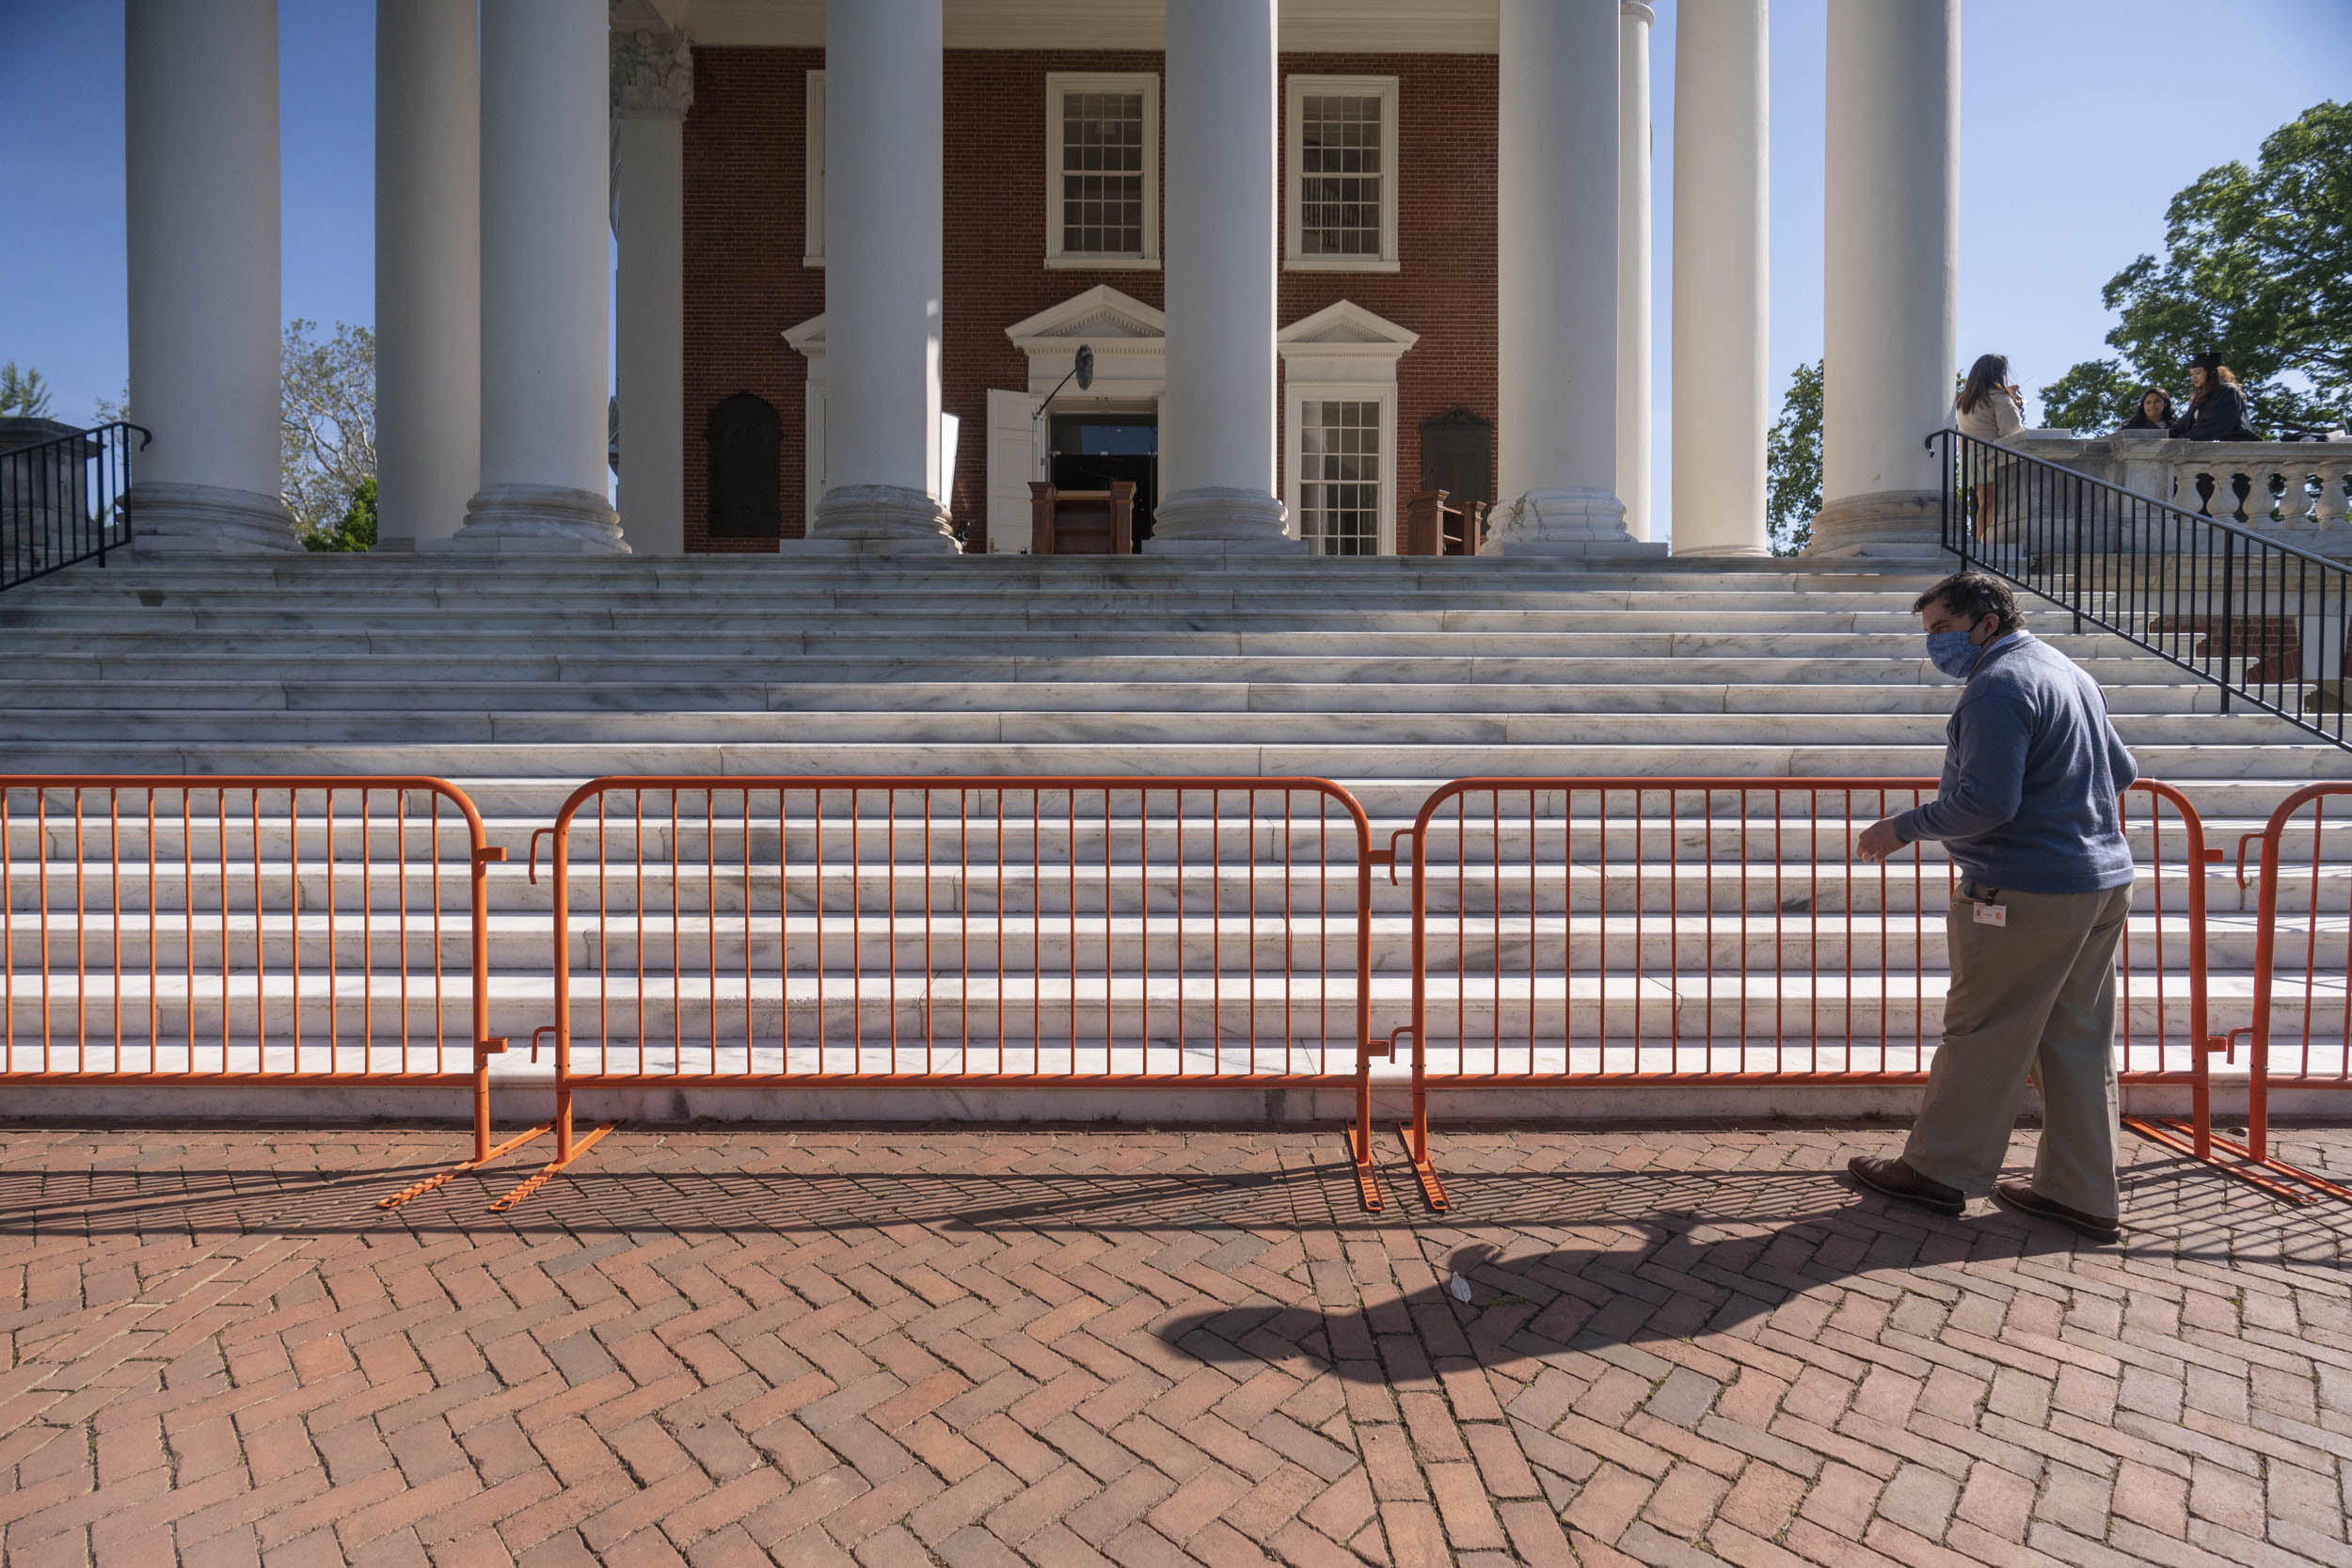 Staff member placing orange baracades in front of the Rotunda steps